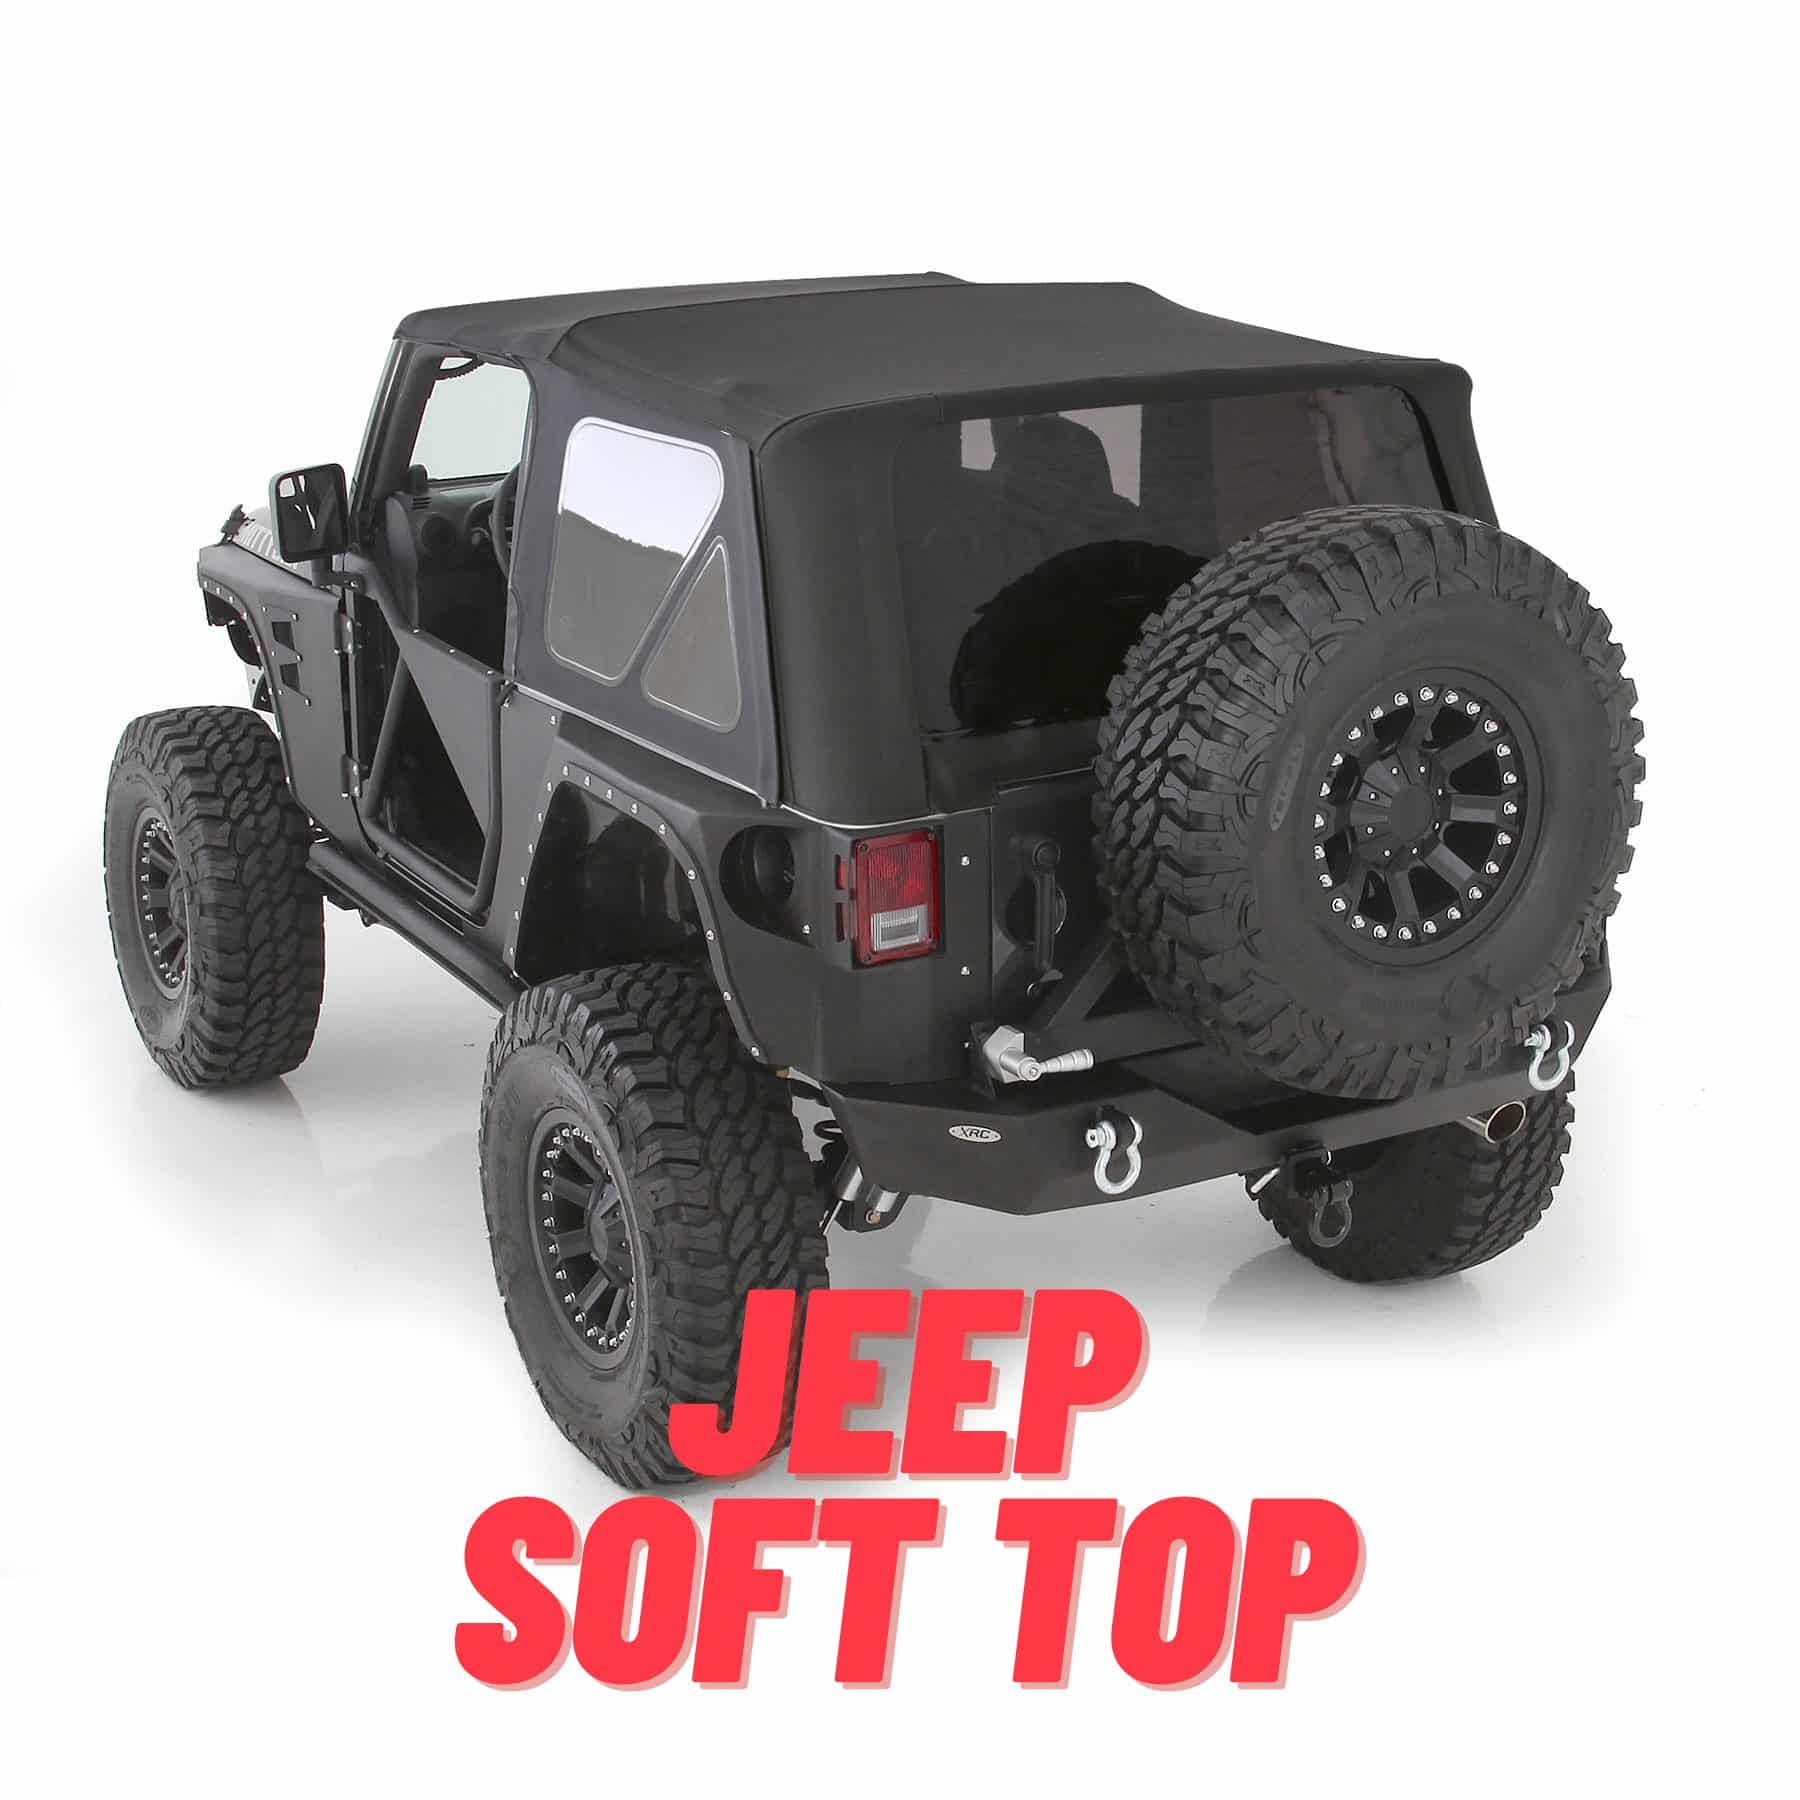 How to Properly Store Your Jeep Soft Top